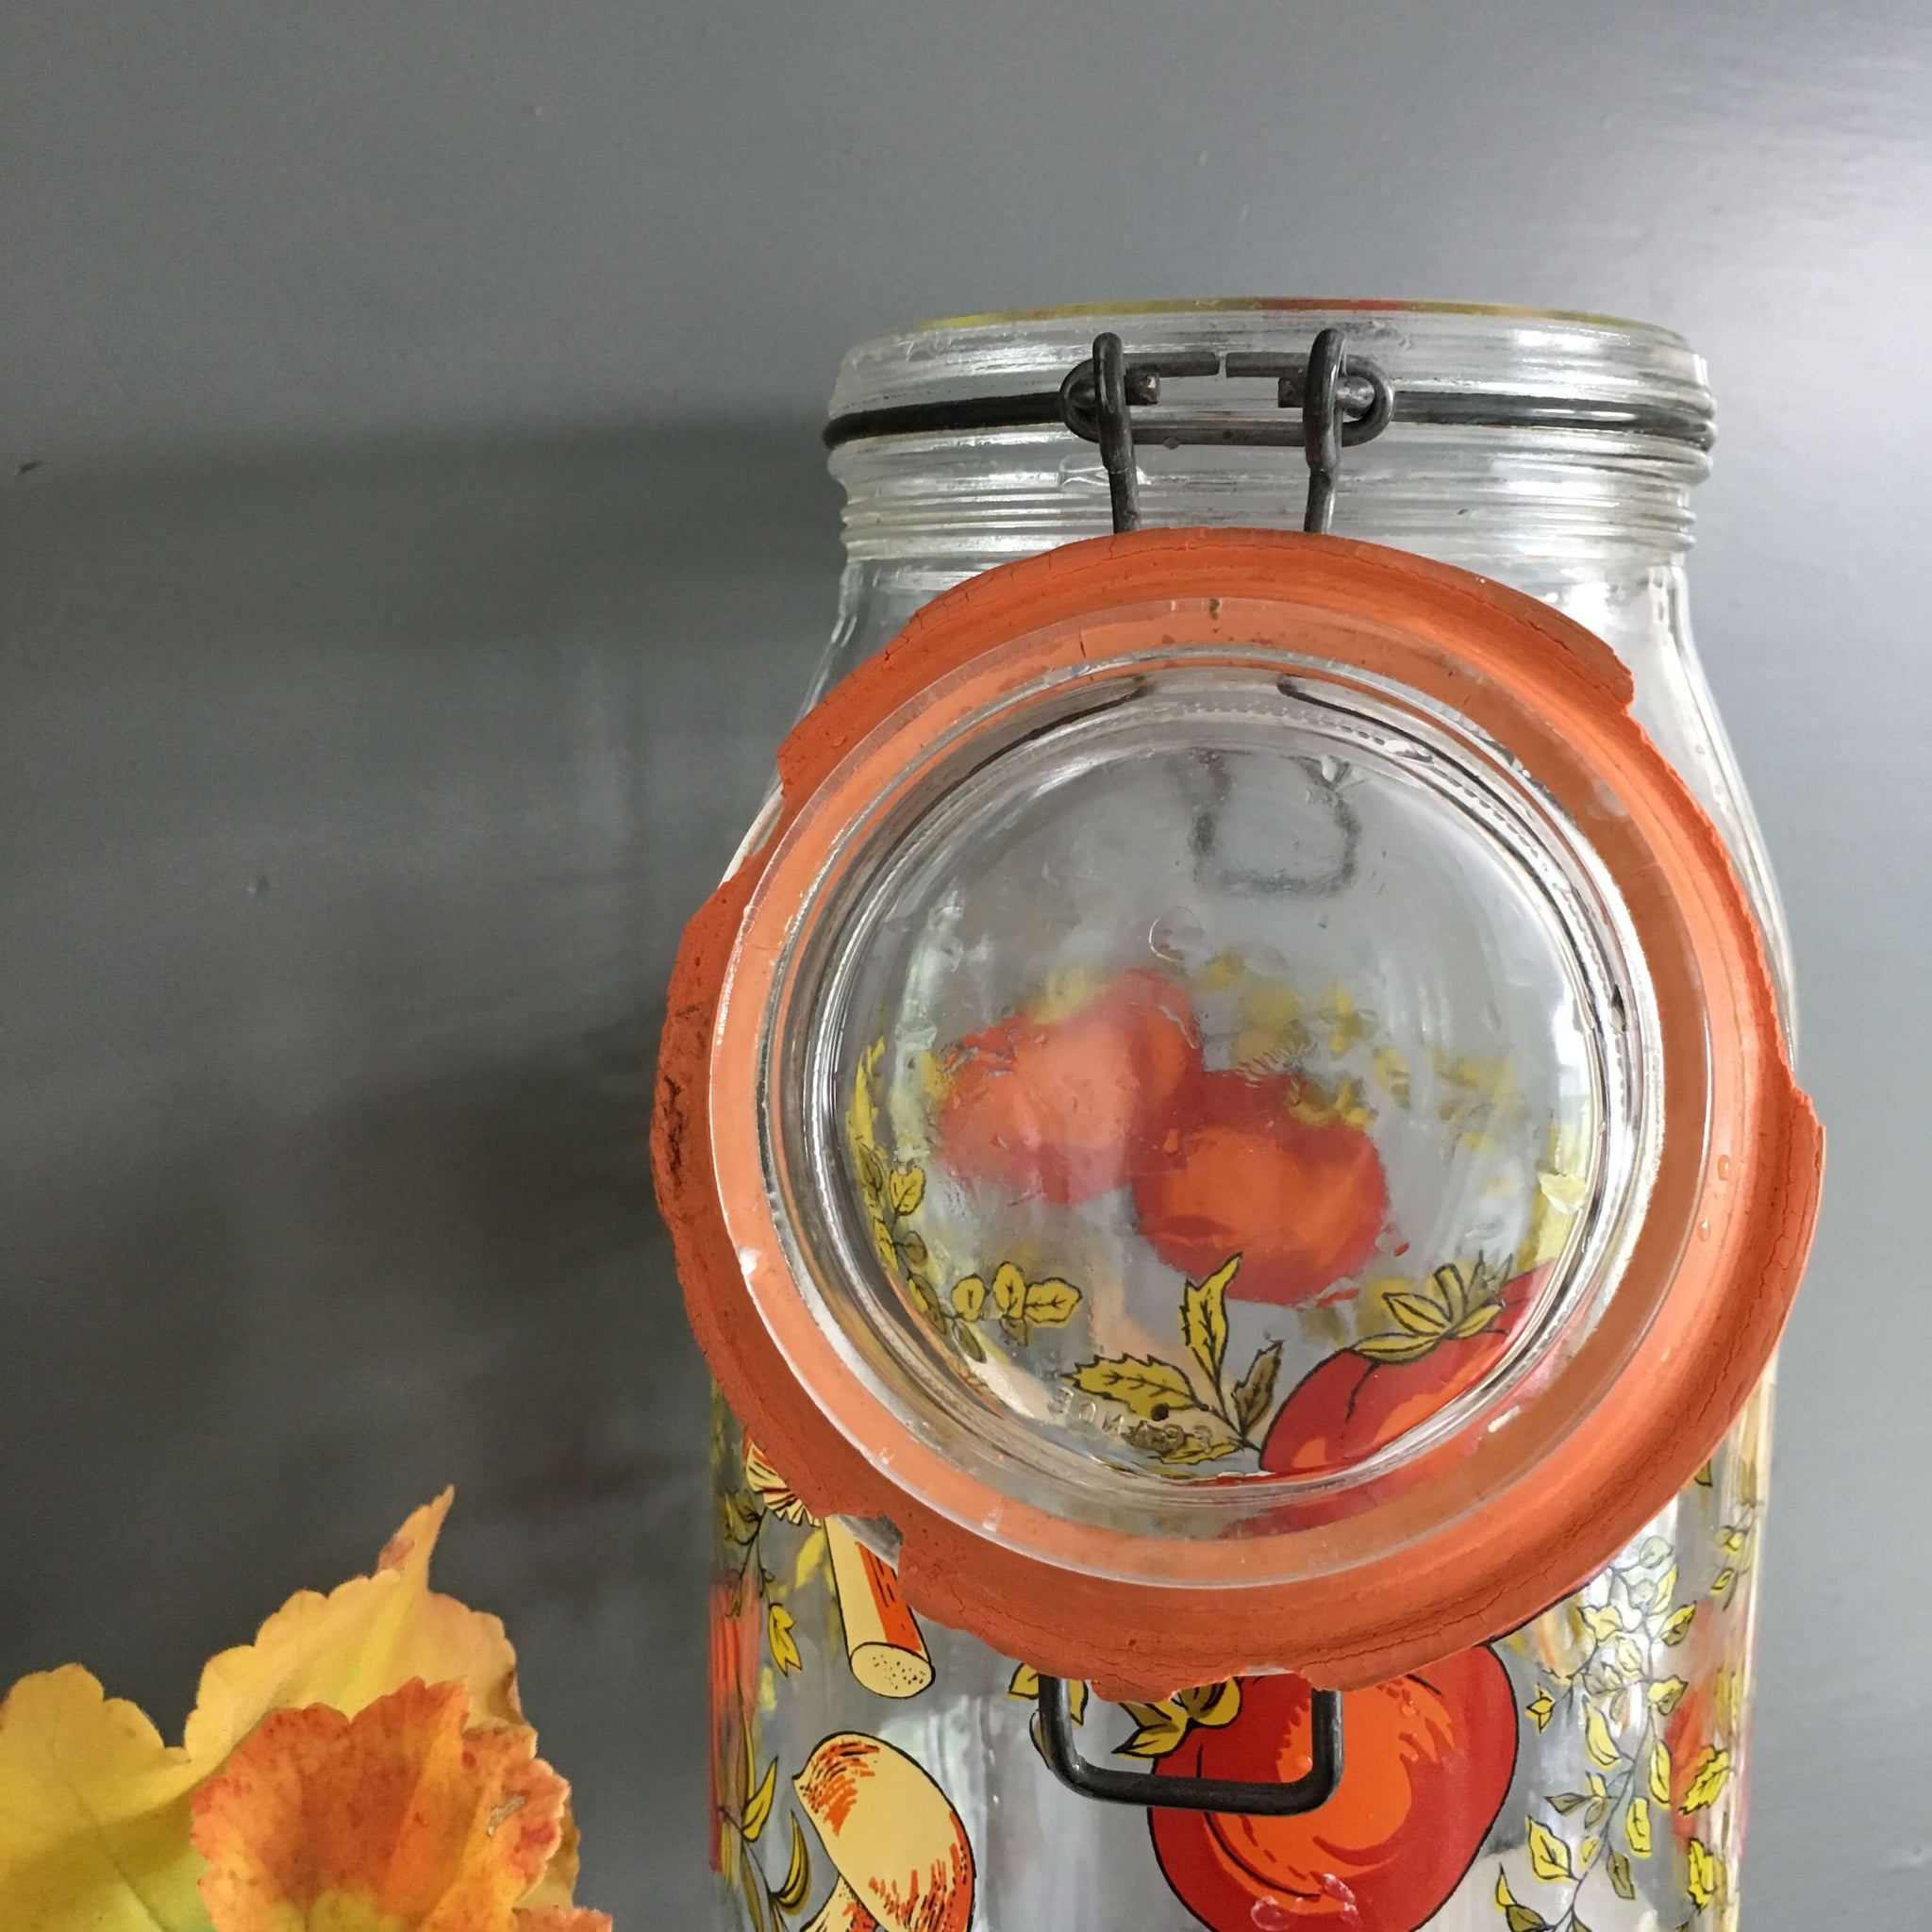 Vintage Spice of Life Canning Jar - Made in France by ARC - 2 Litre Size Storage Container